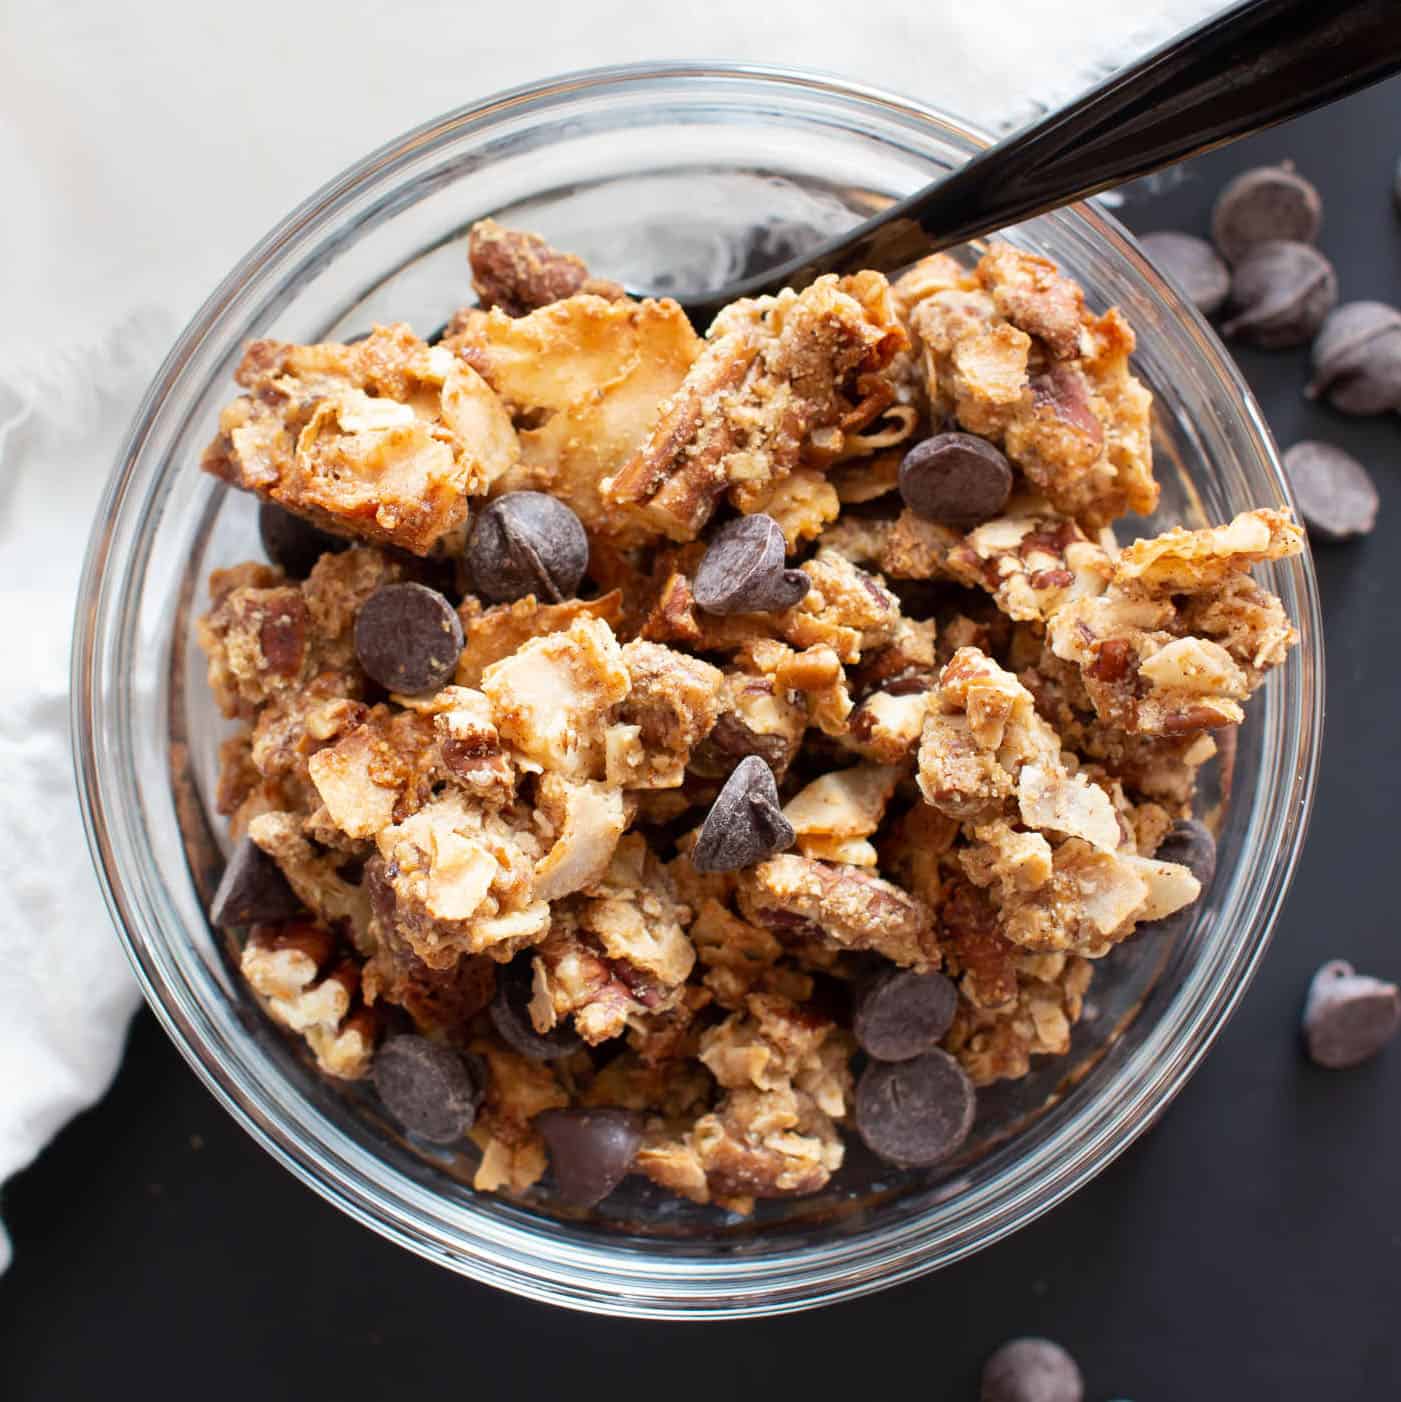 Easy Homemade Granola Recipe with Chocolate Chips